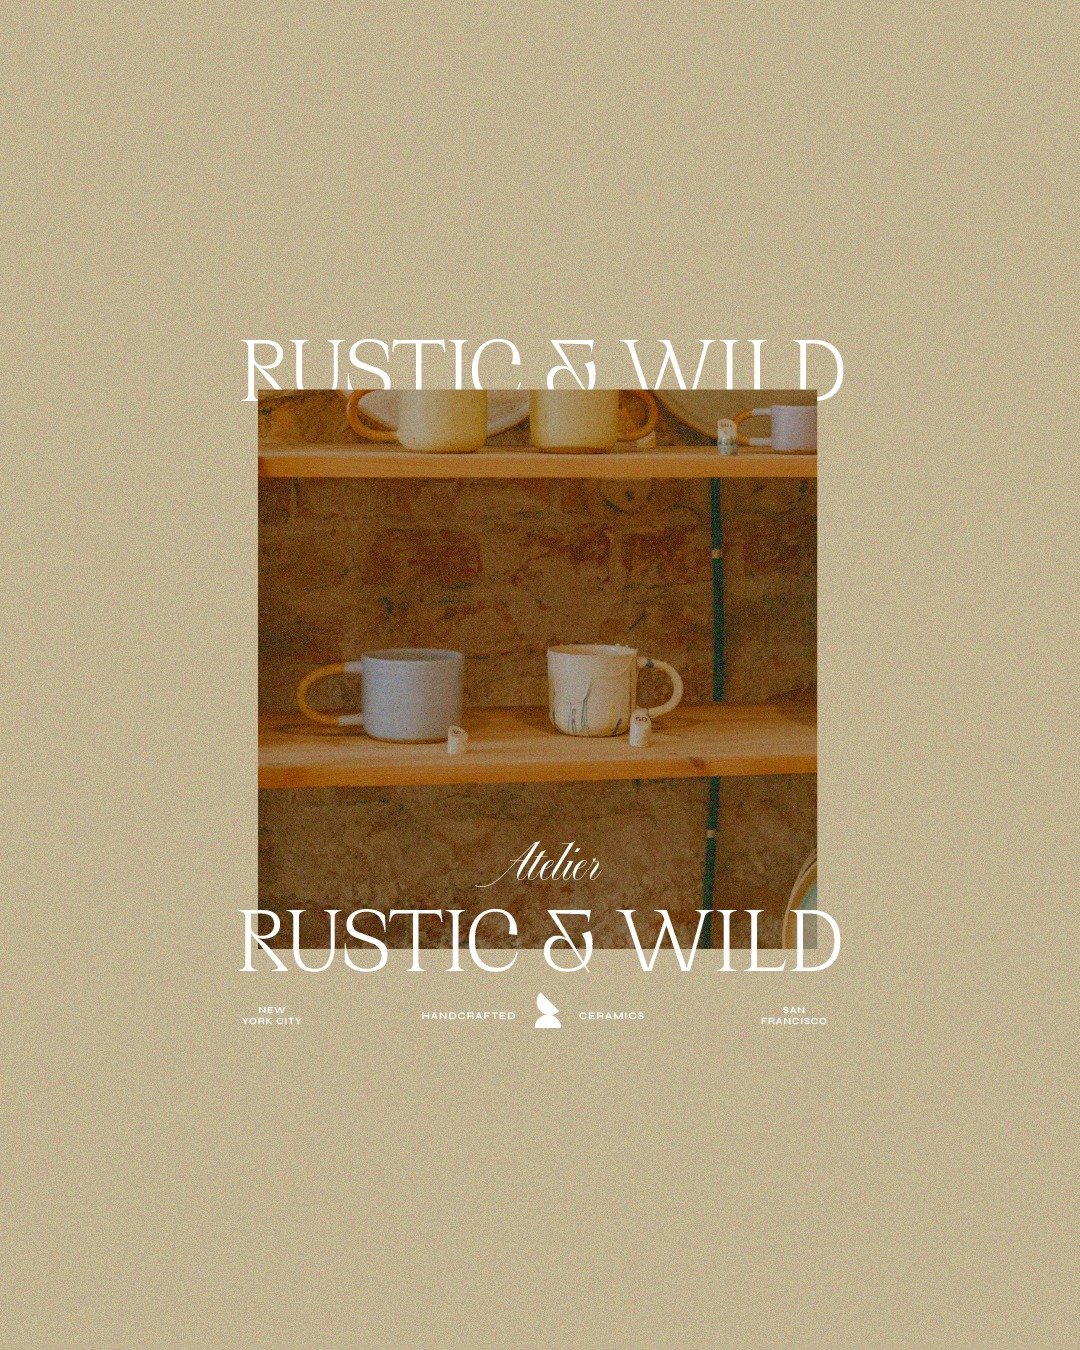 First look at Rustic &amp; Wild ◗ I've been feeling far more inspired lately and have been making more time to create some passion projects when I can. So this is one that I just had an urge to create recently 🤍 

Would love to hear your thoughts on